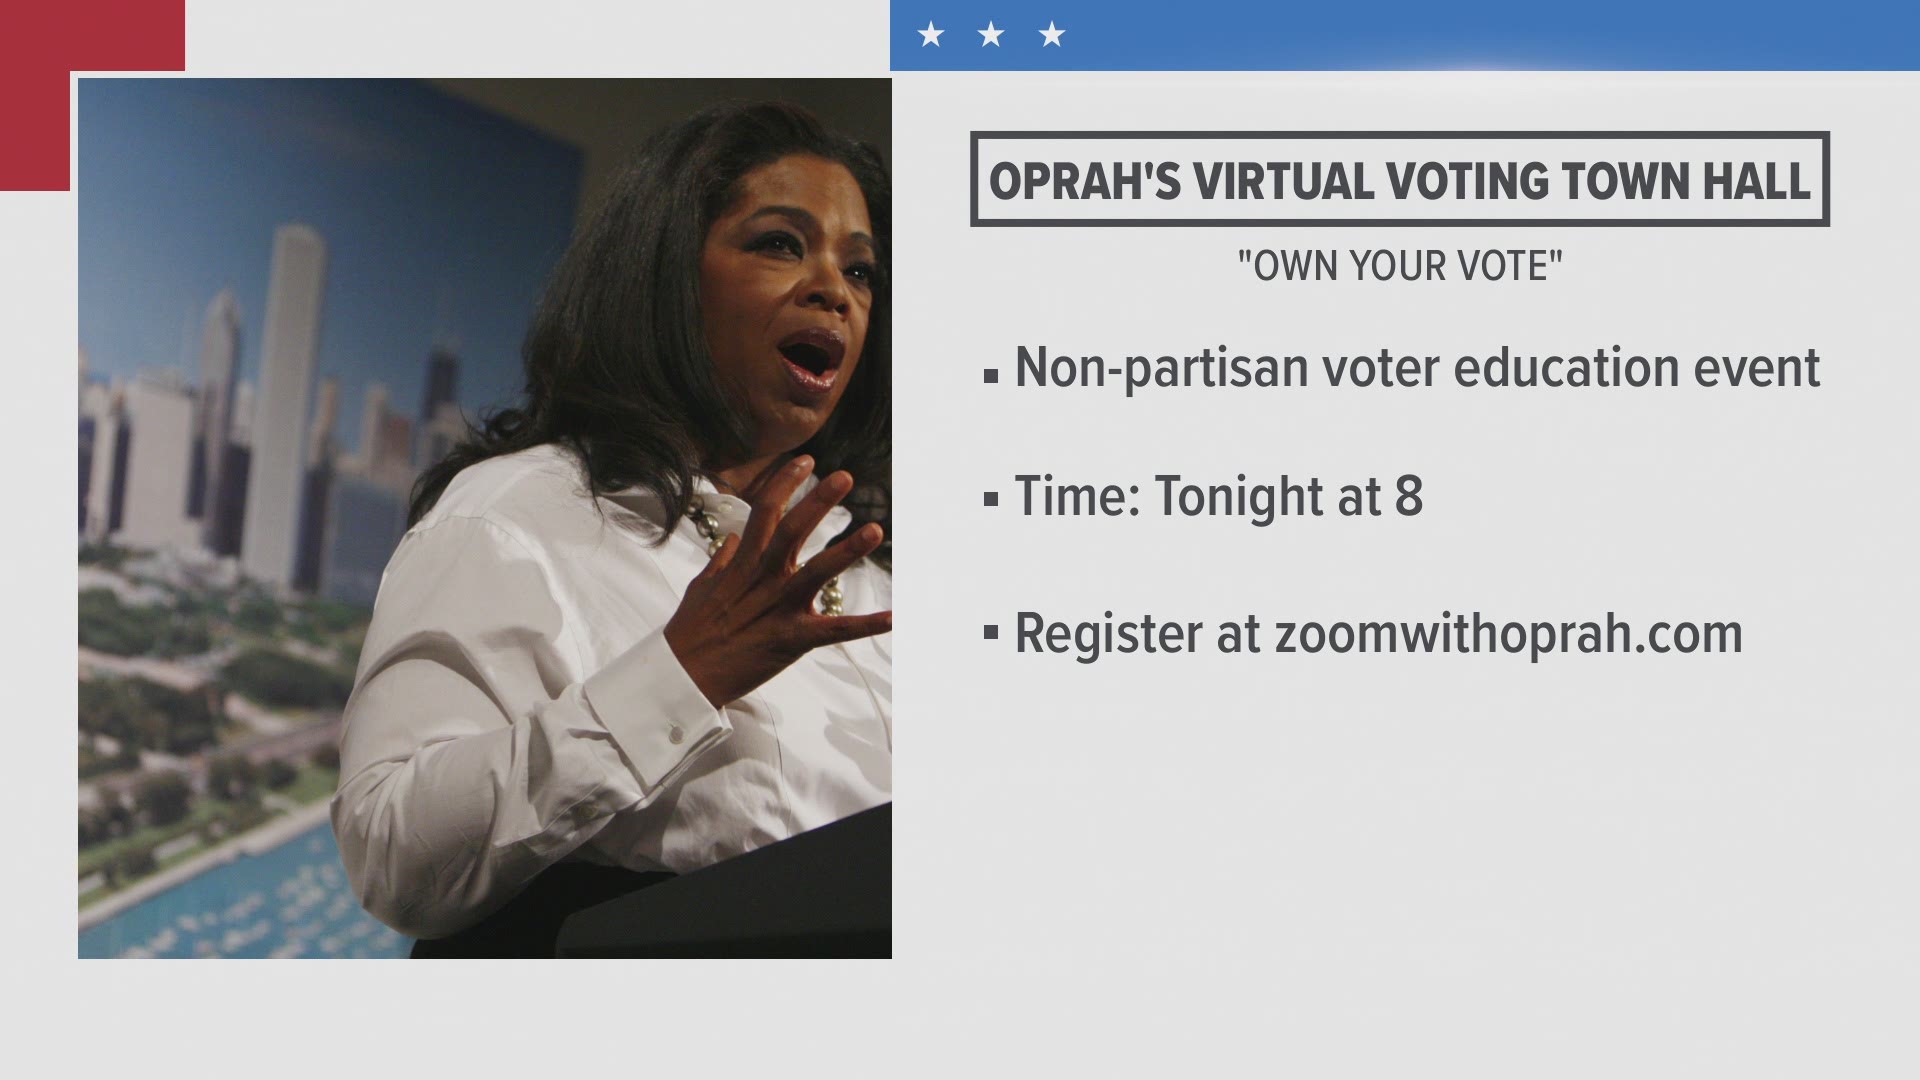 Oprah to host virtual town hall Wednesday to encourage voter turnout in Michigan